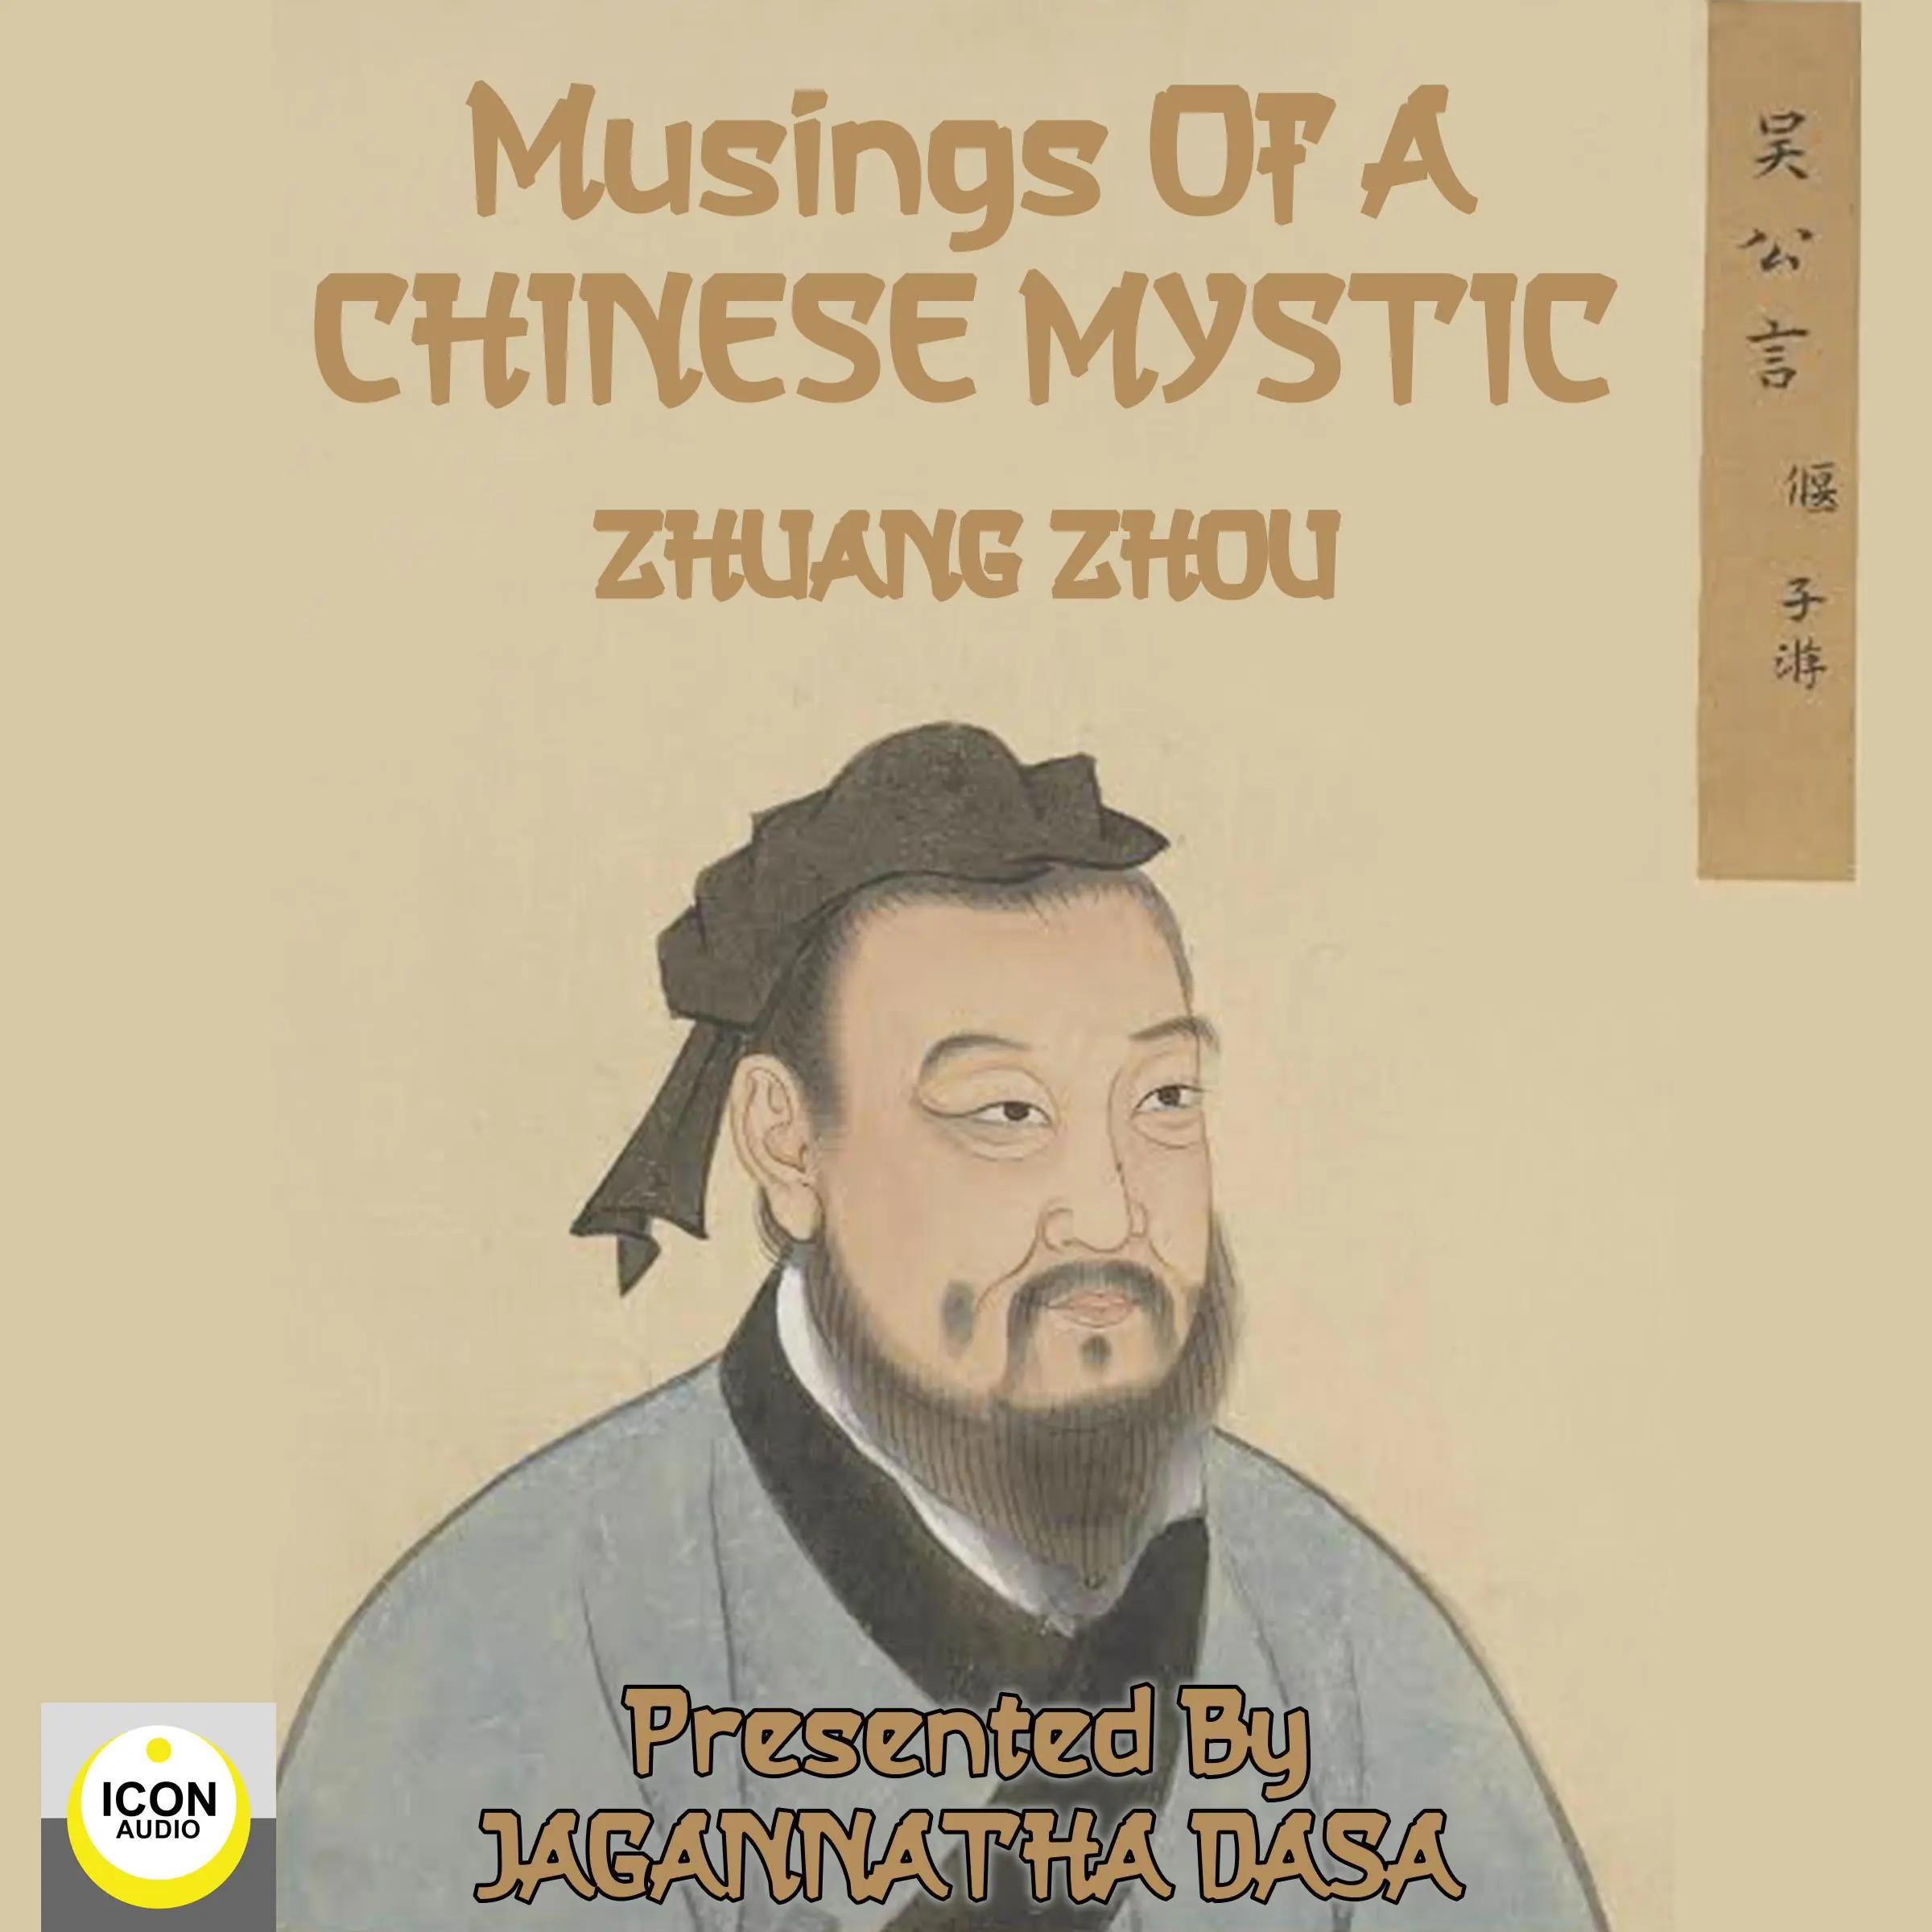 Musings of a Chinese Mystic by Zhuang Zhou Audiobook